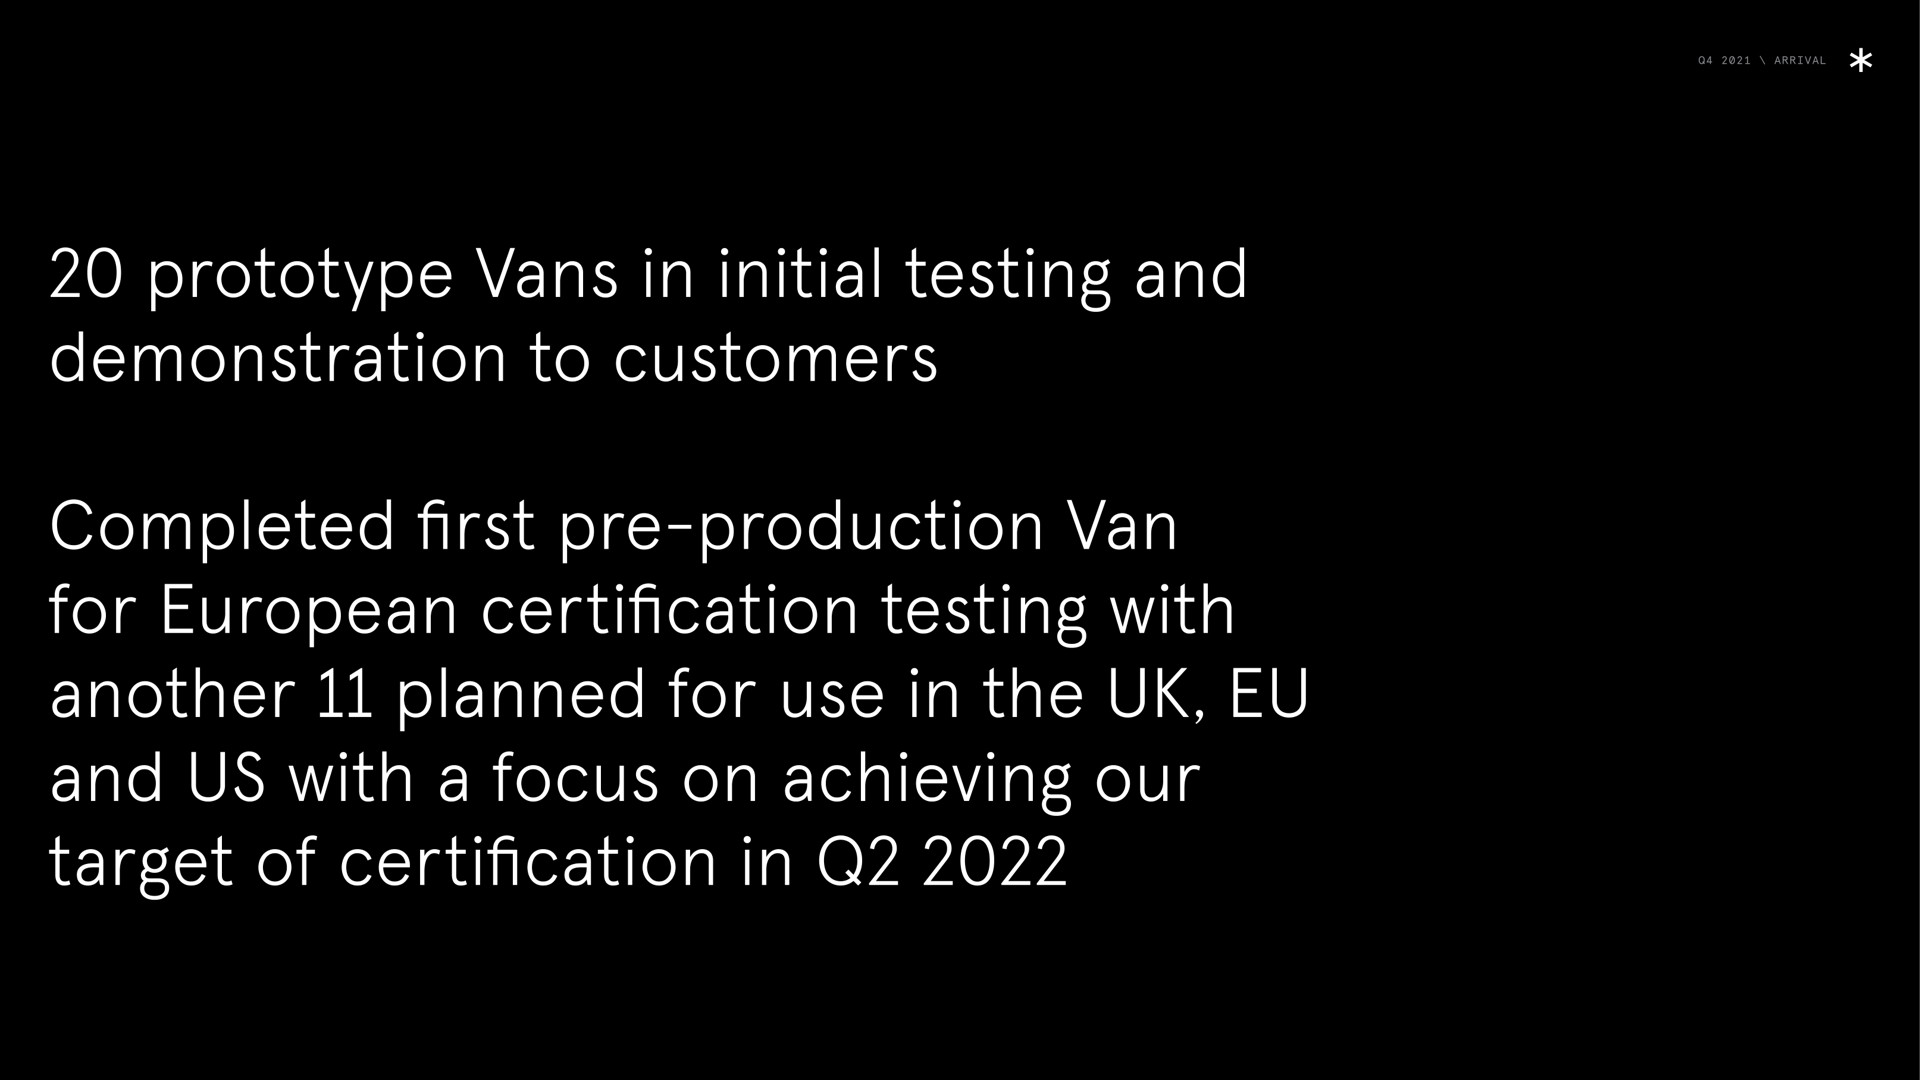 arrival prototype vans in initial testing and demonstration to customers completed first production van for certification testing with another planned for use in the and us with a focus on achieving our target of certification in | Arrival